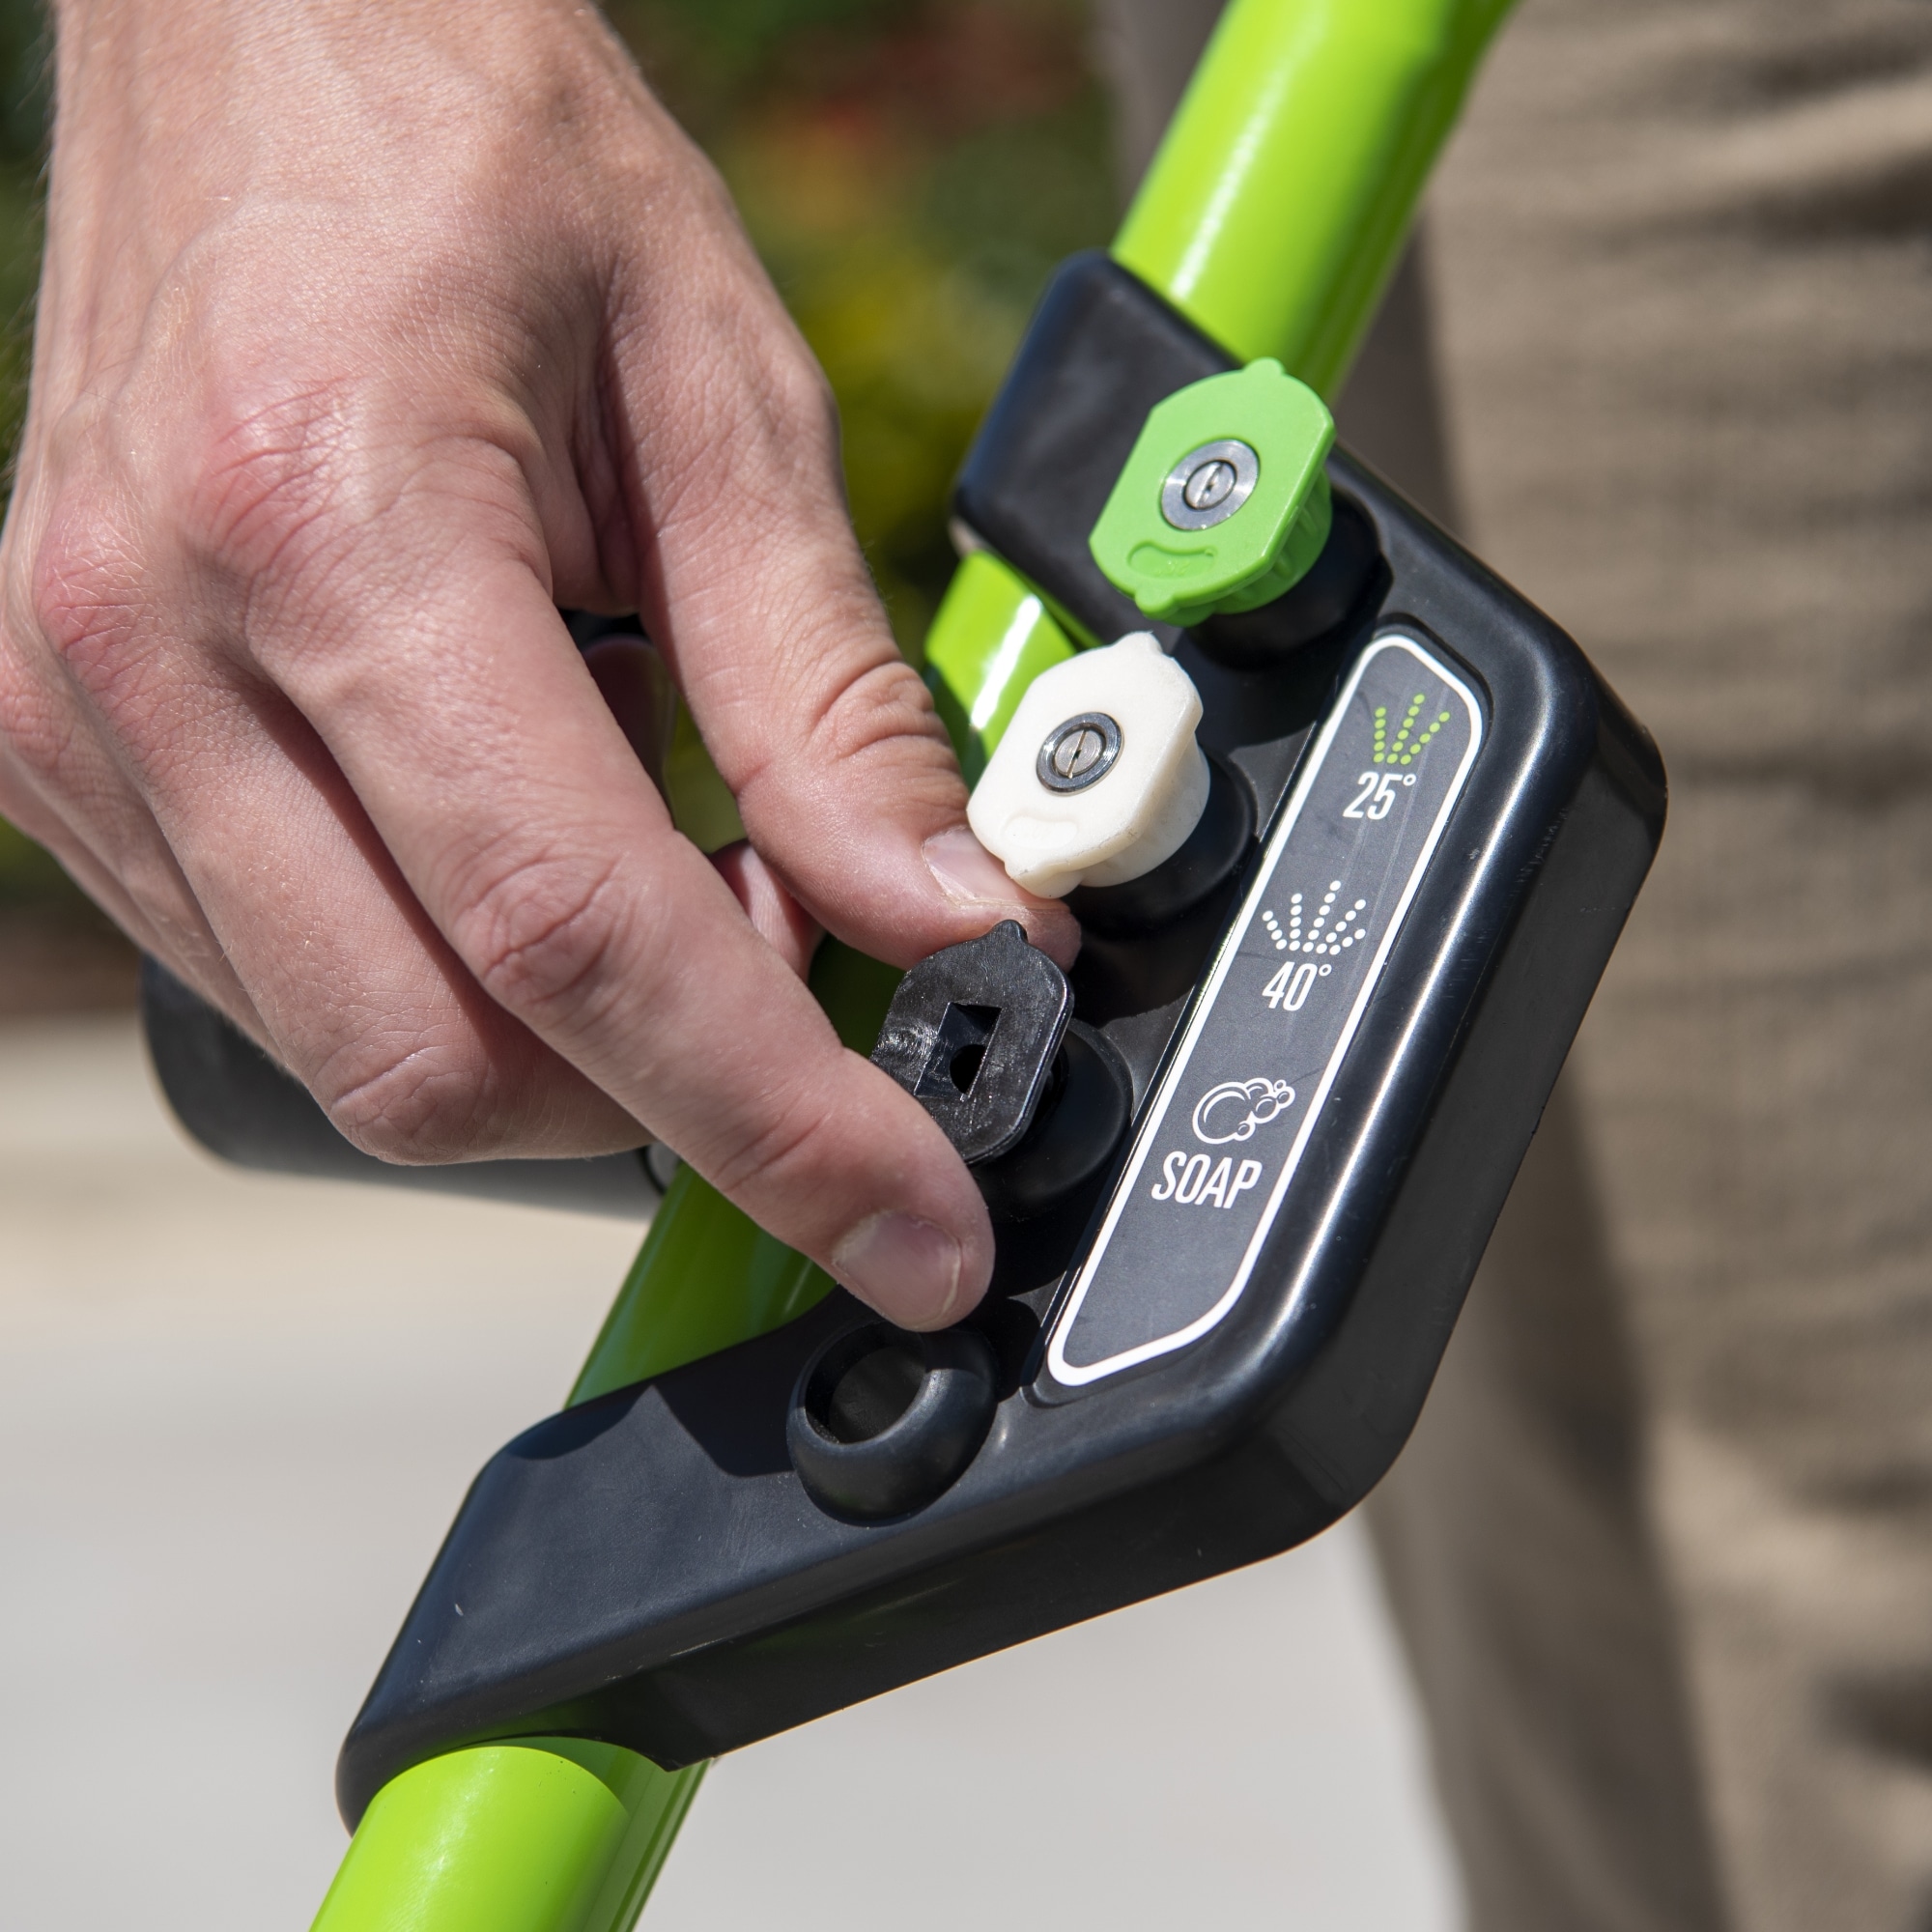 Greenworks 2000 Max PSI @ 1.1 GPM (13 Amp) Electric Pressure Washer  GPW2000-1RG + Greenworks Surface Cleaner Universal Pressure Washer  Attachment